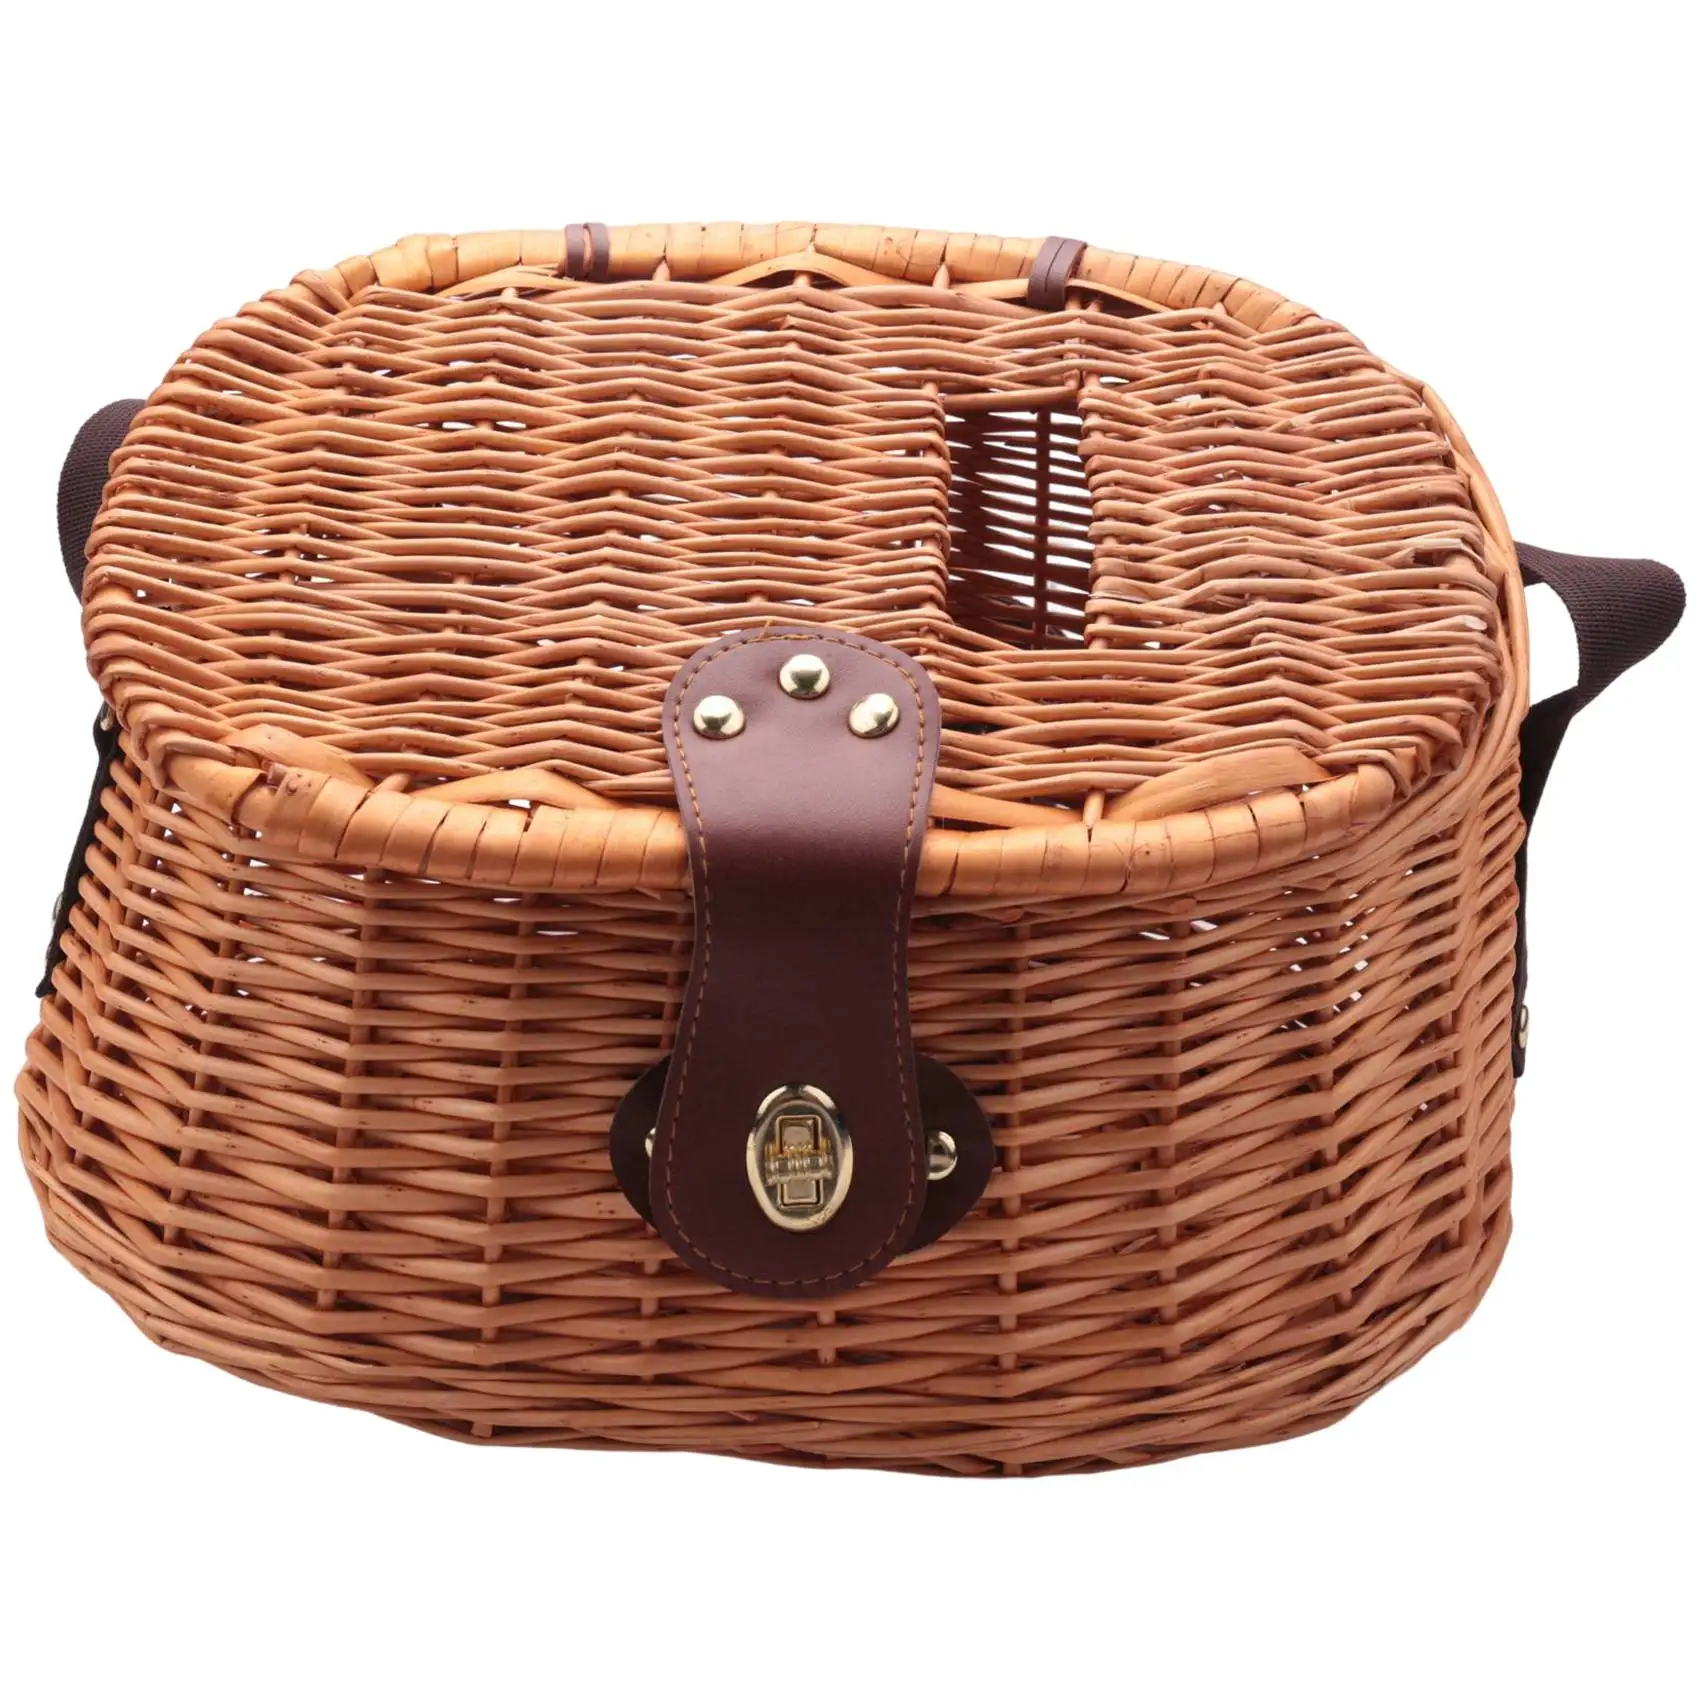 Wicker Basket Fishing Creel Trout Perch Cage Tackle Fisherman Box Outdoor  Classical Willow Trout Fishing Creel Basket - AliExpress